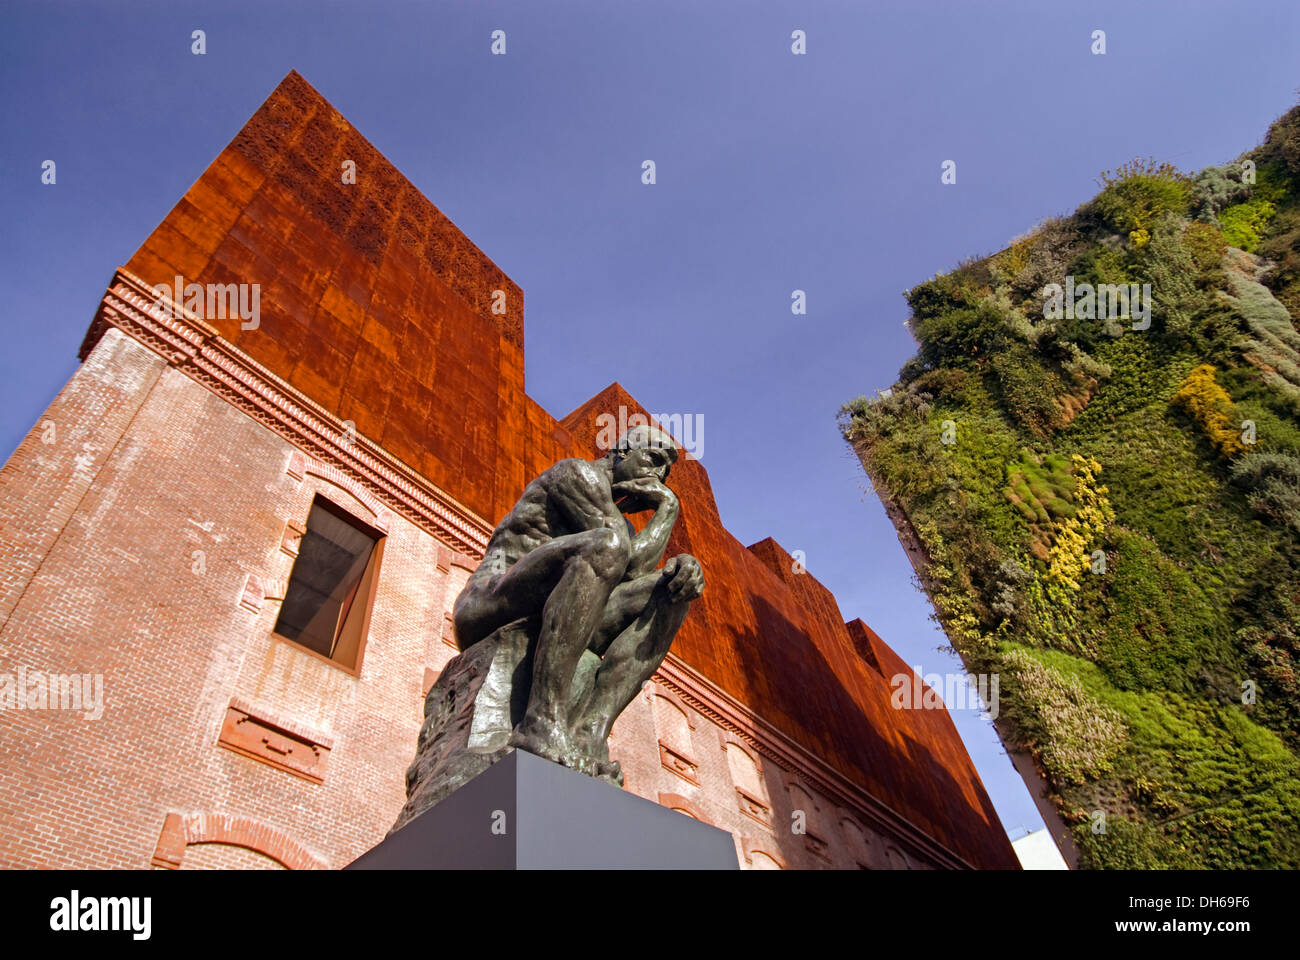 Rodin's sculpture 'The Thinker' in front of the Caixa Forum Museum Art Center, Madrid, Spain, Europe Stock Photo